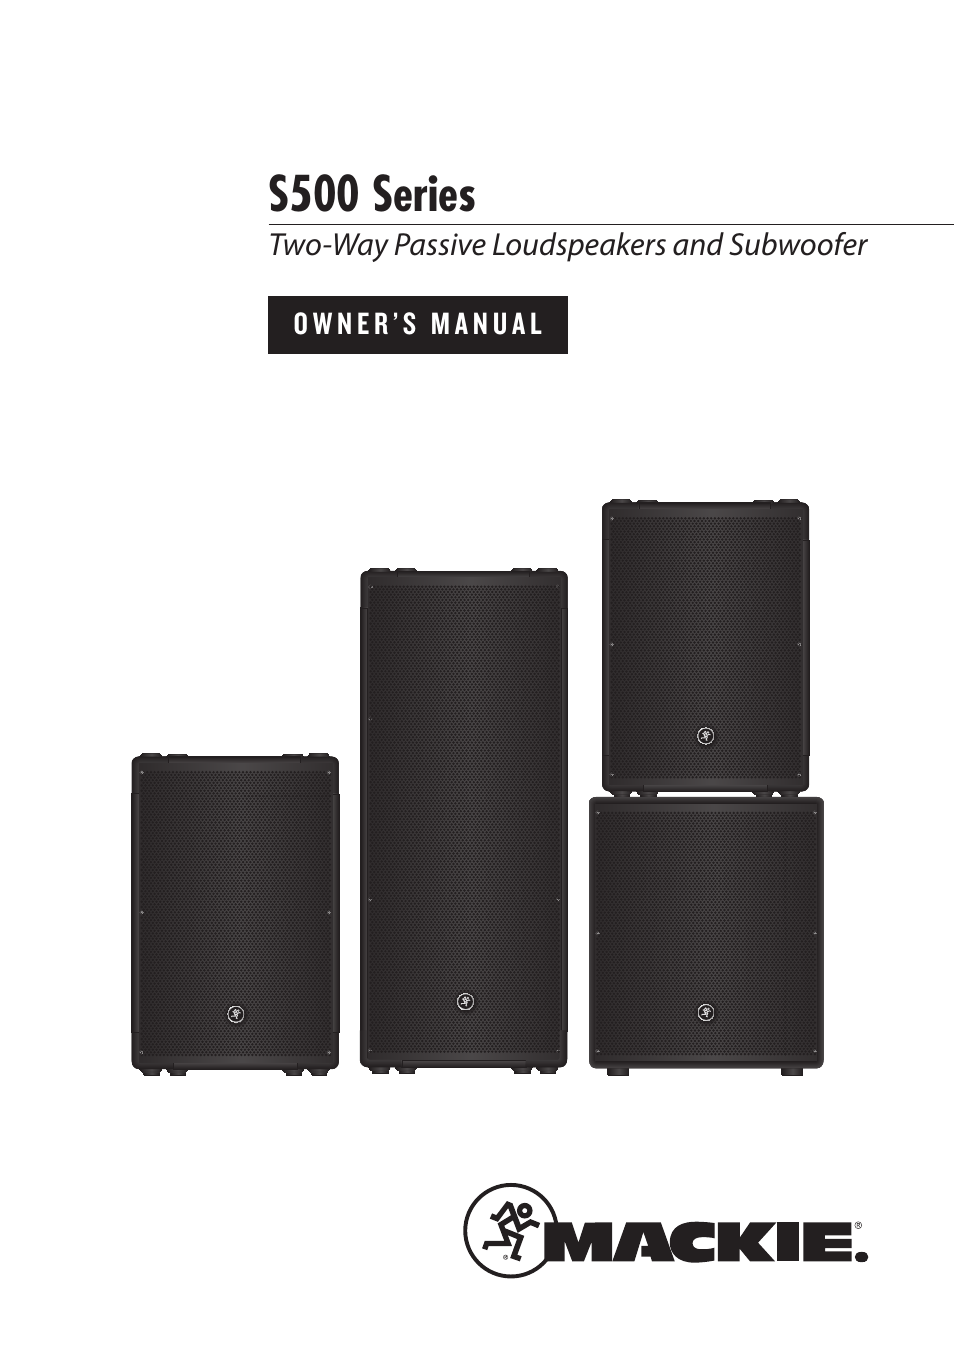 Two-Way Passive Loudspeakers and Subwoofer S500